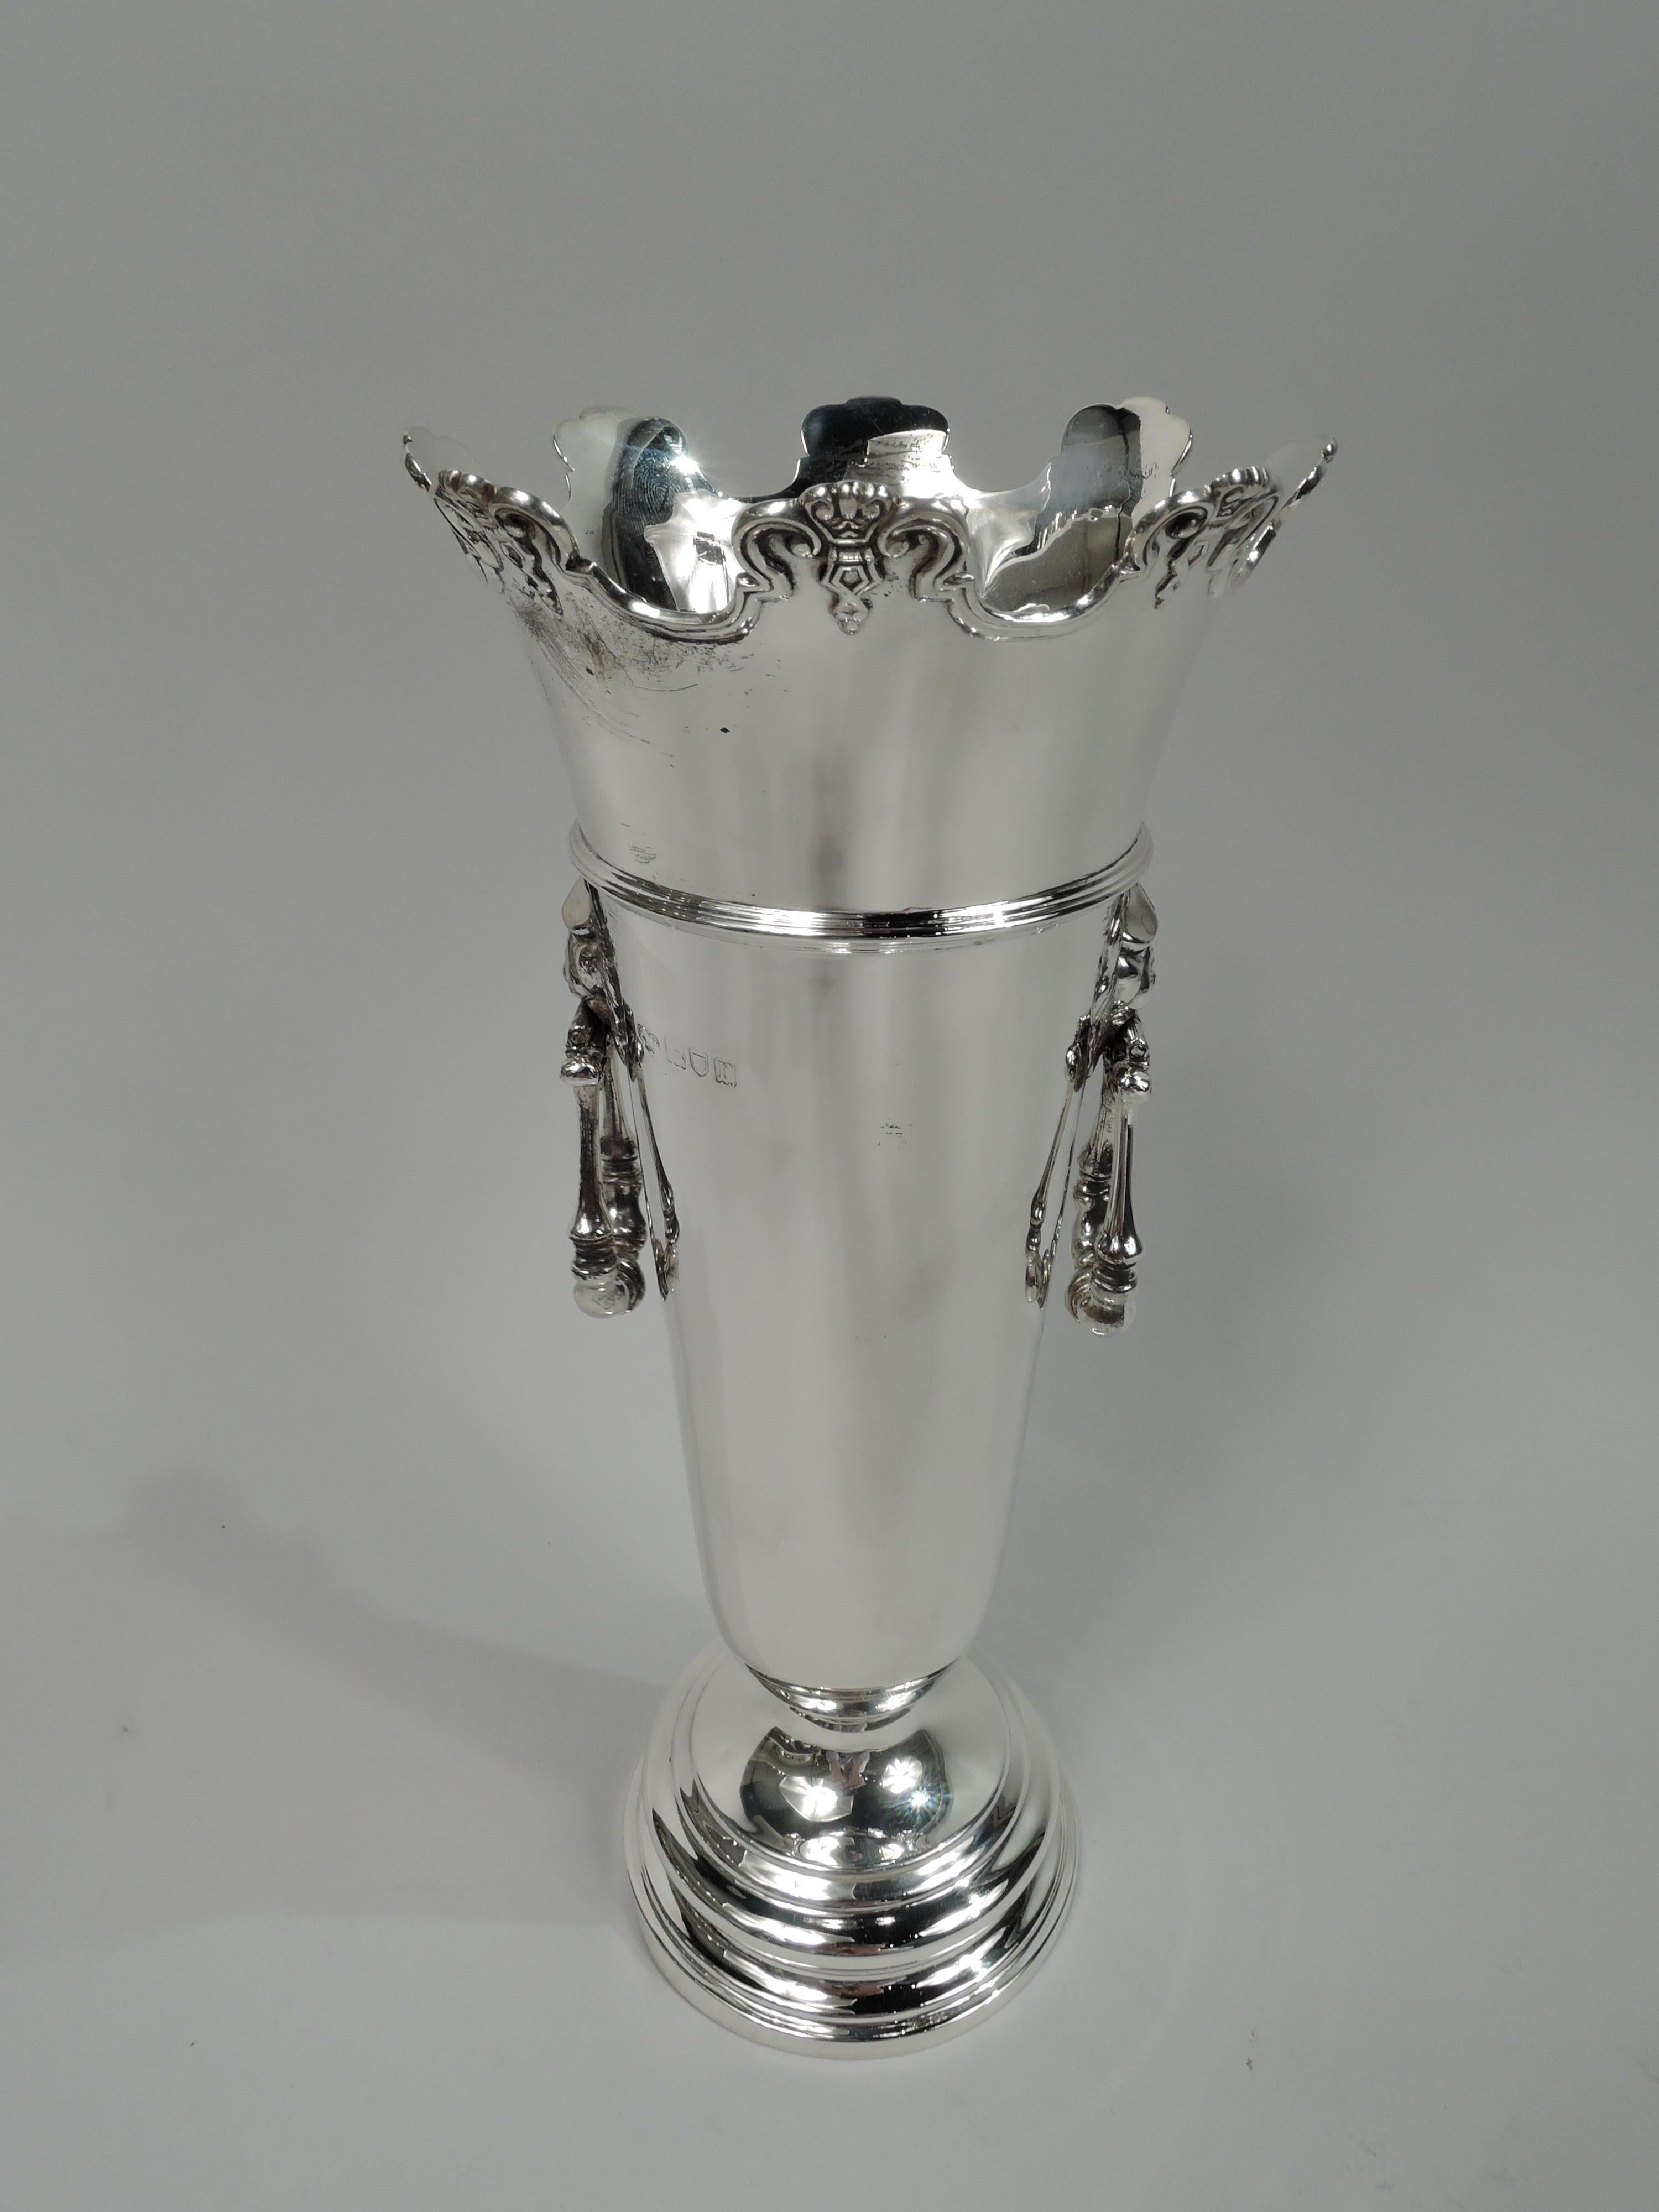 George V sterling silver vase. Made by Goldsmiths & Silversmiths Co. Ltd in London in 1912. Tapering and girdled tube on stepped foot. Flared and castellated rim with applied molding and ornament. Lion’s head side mounts with hinged and turned